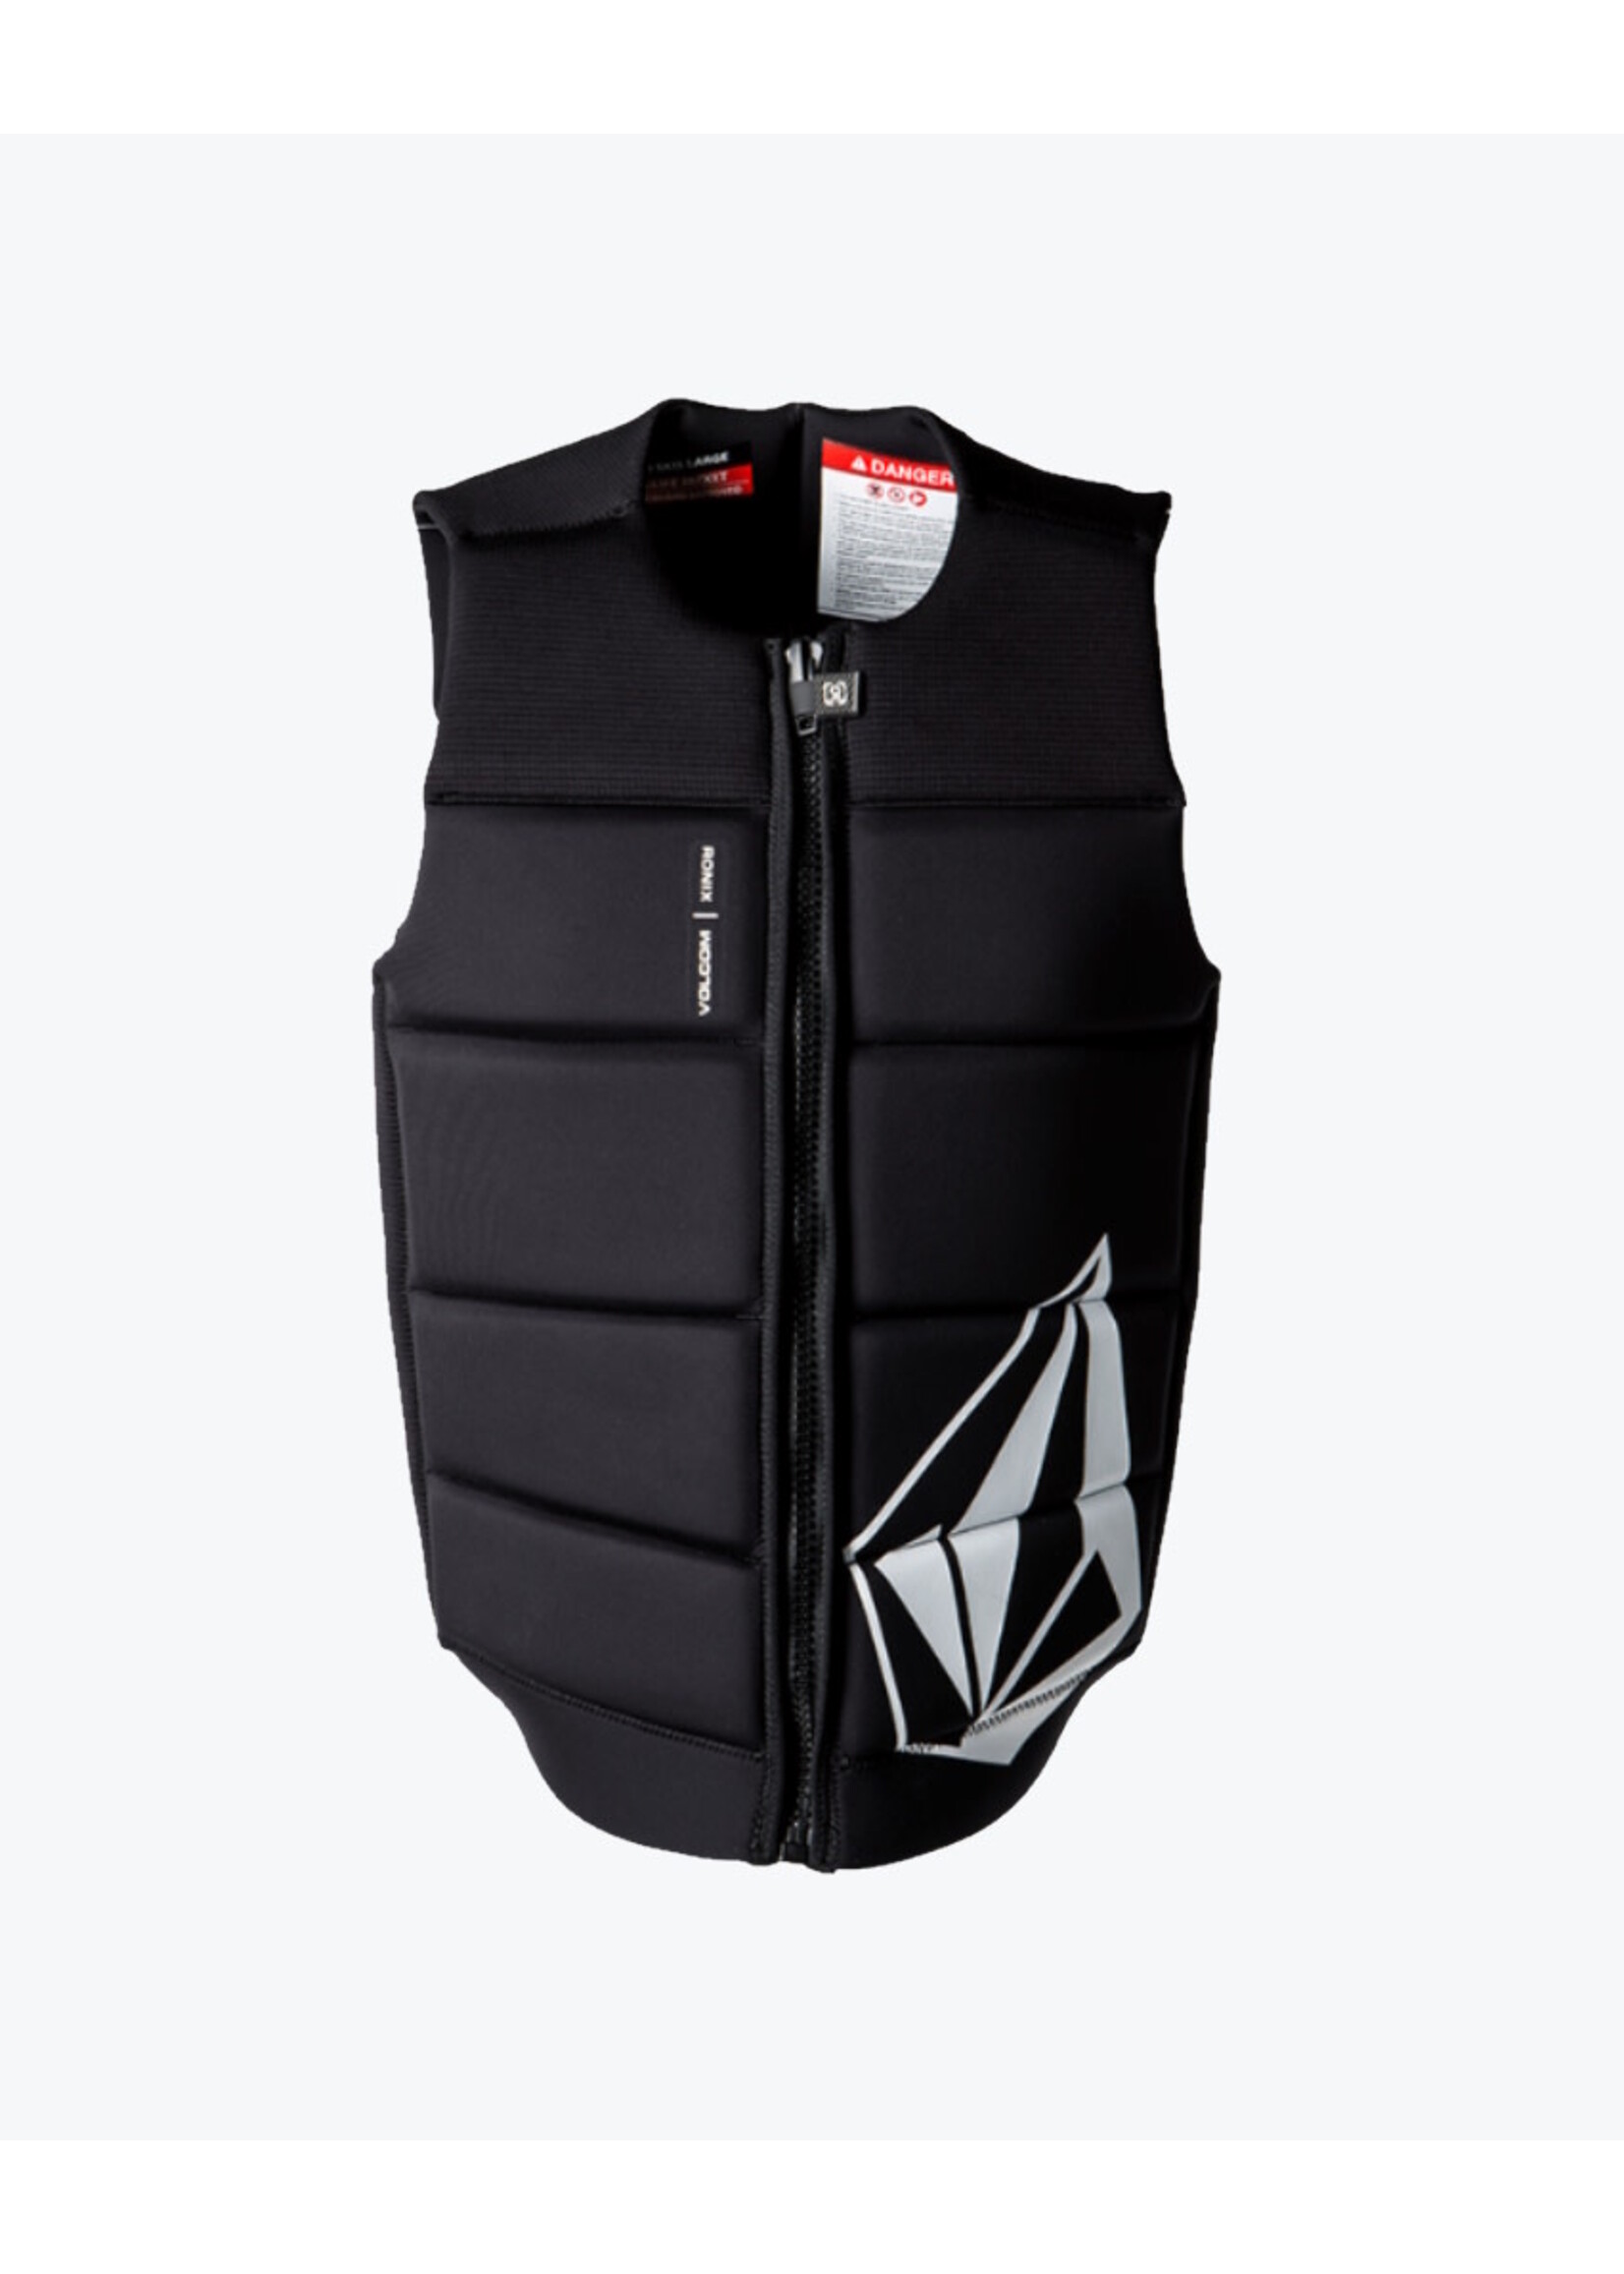 Ronix Volcom CE Approved Impact Vest